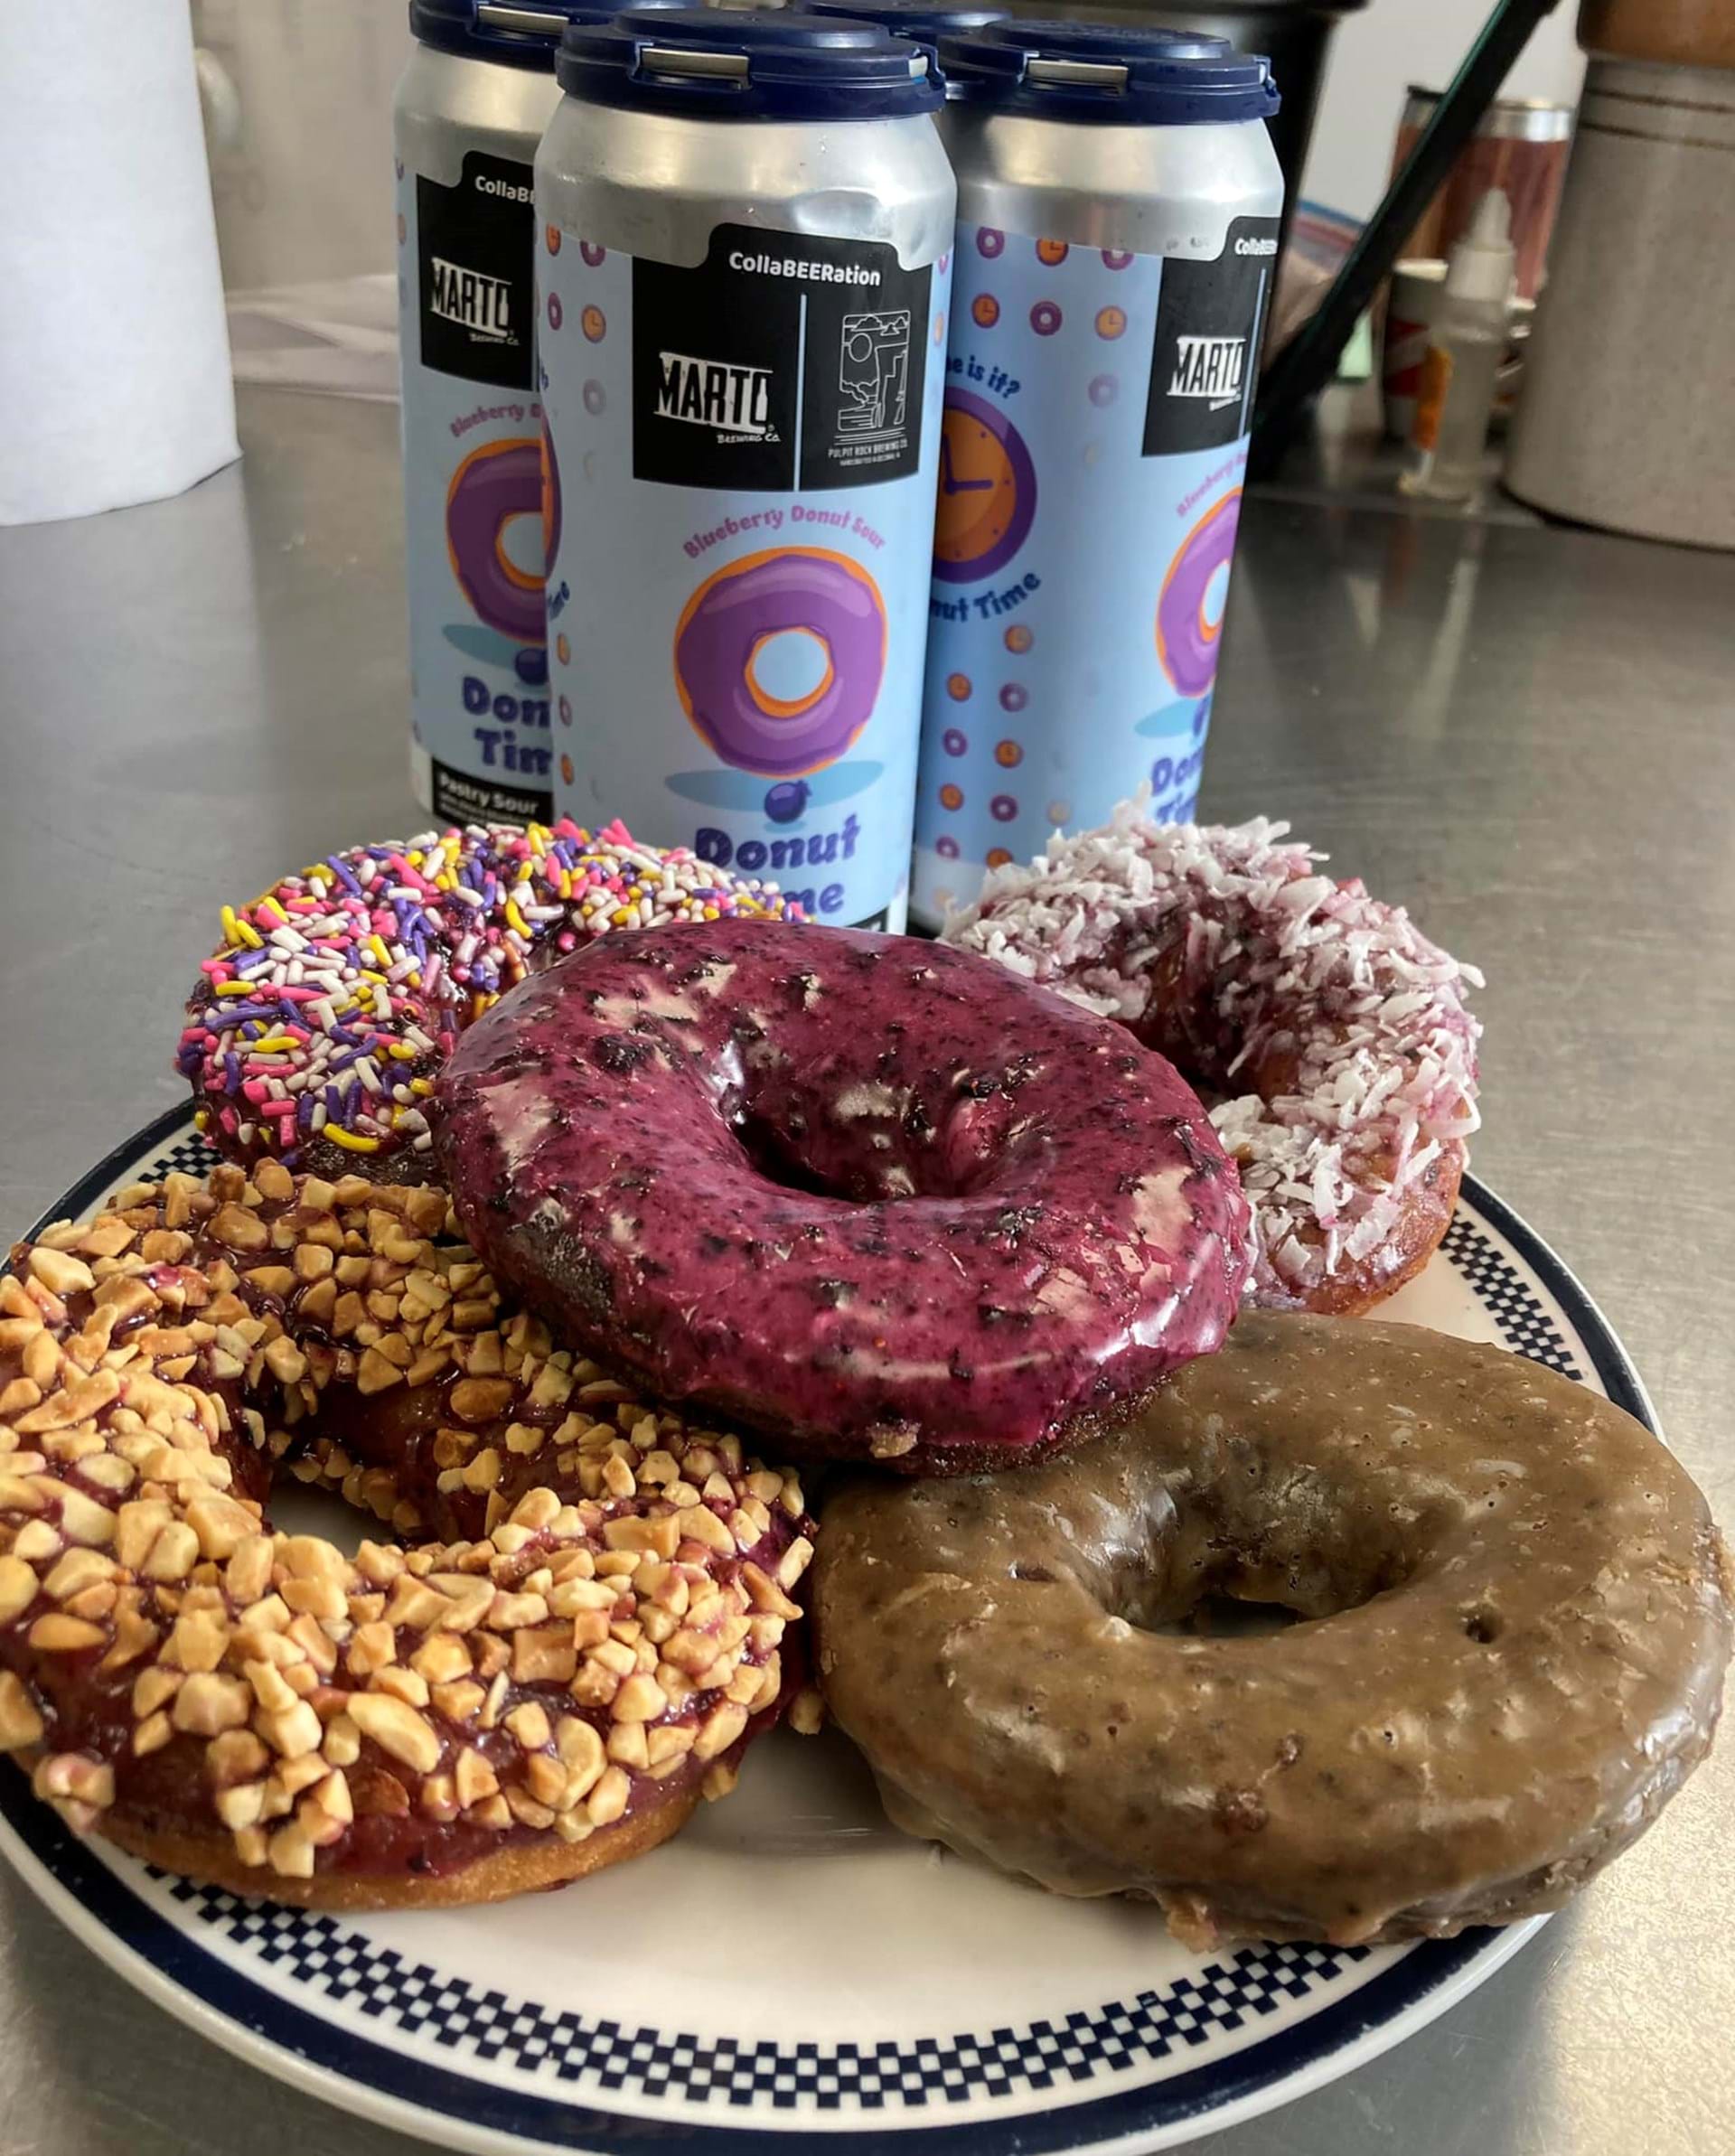 Jitter's Donuts & Beer Collaboration with Marto Brewing